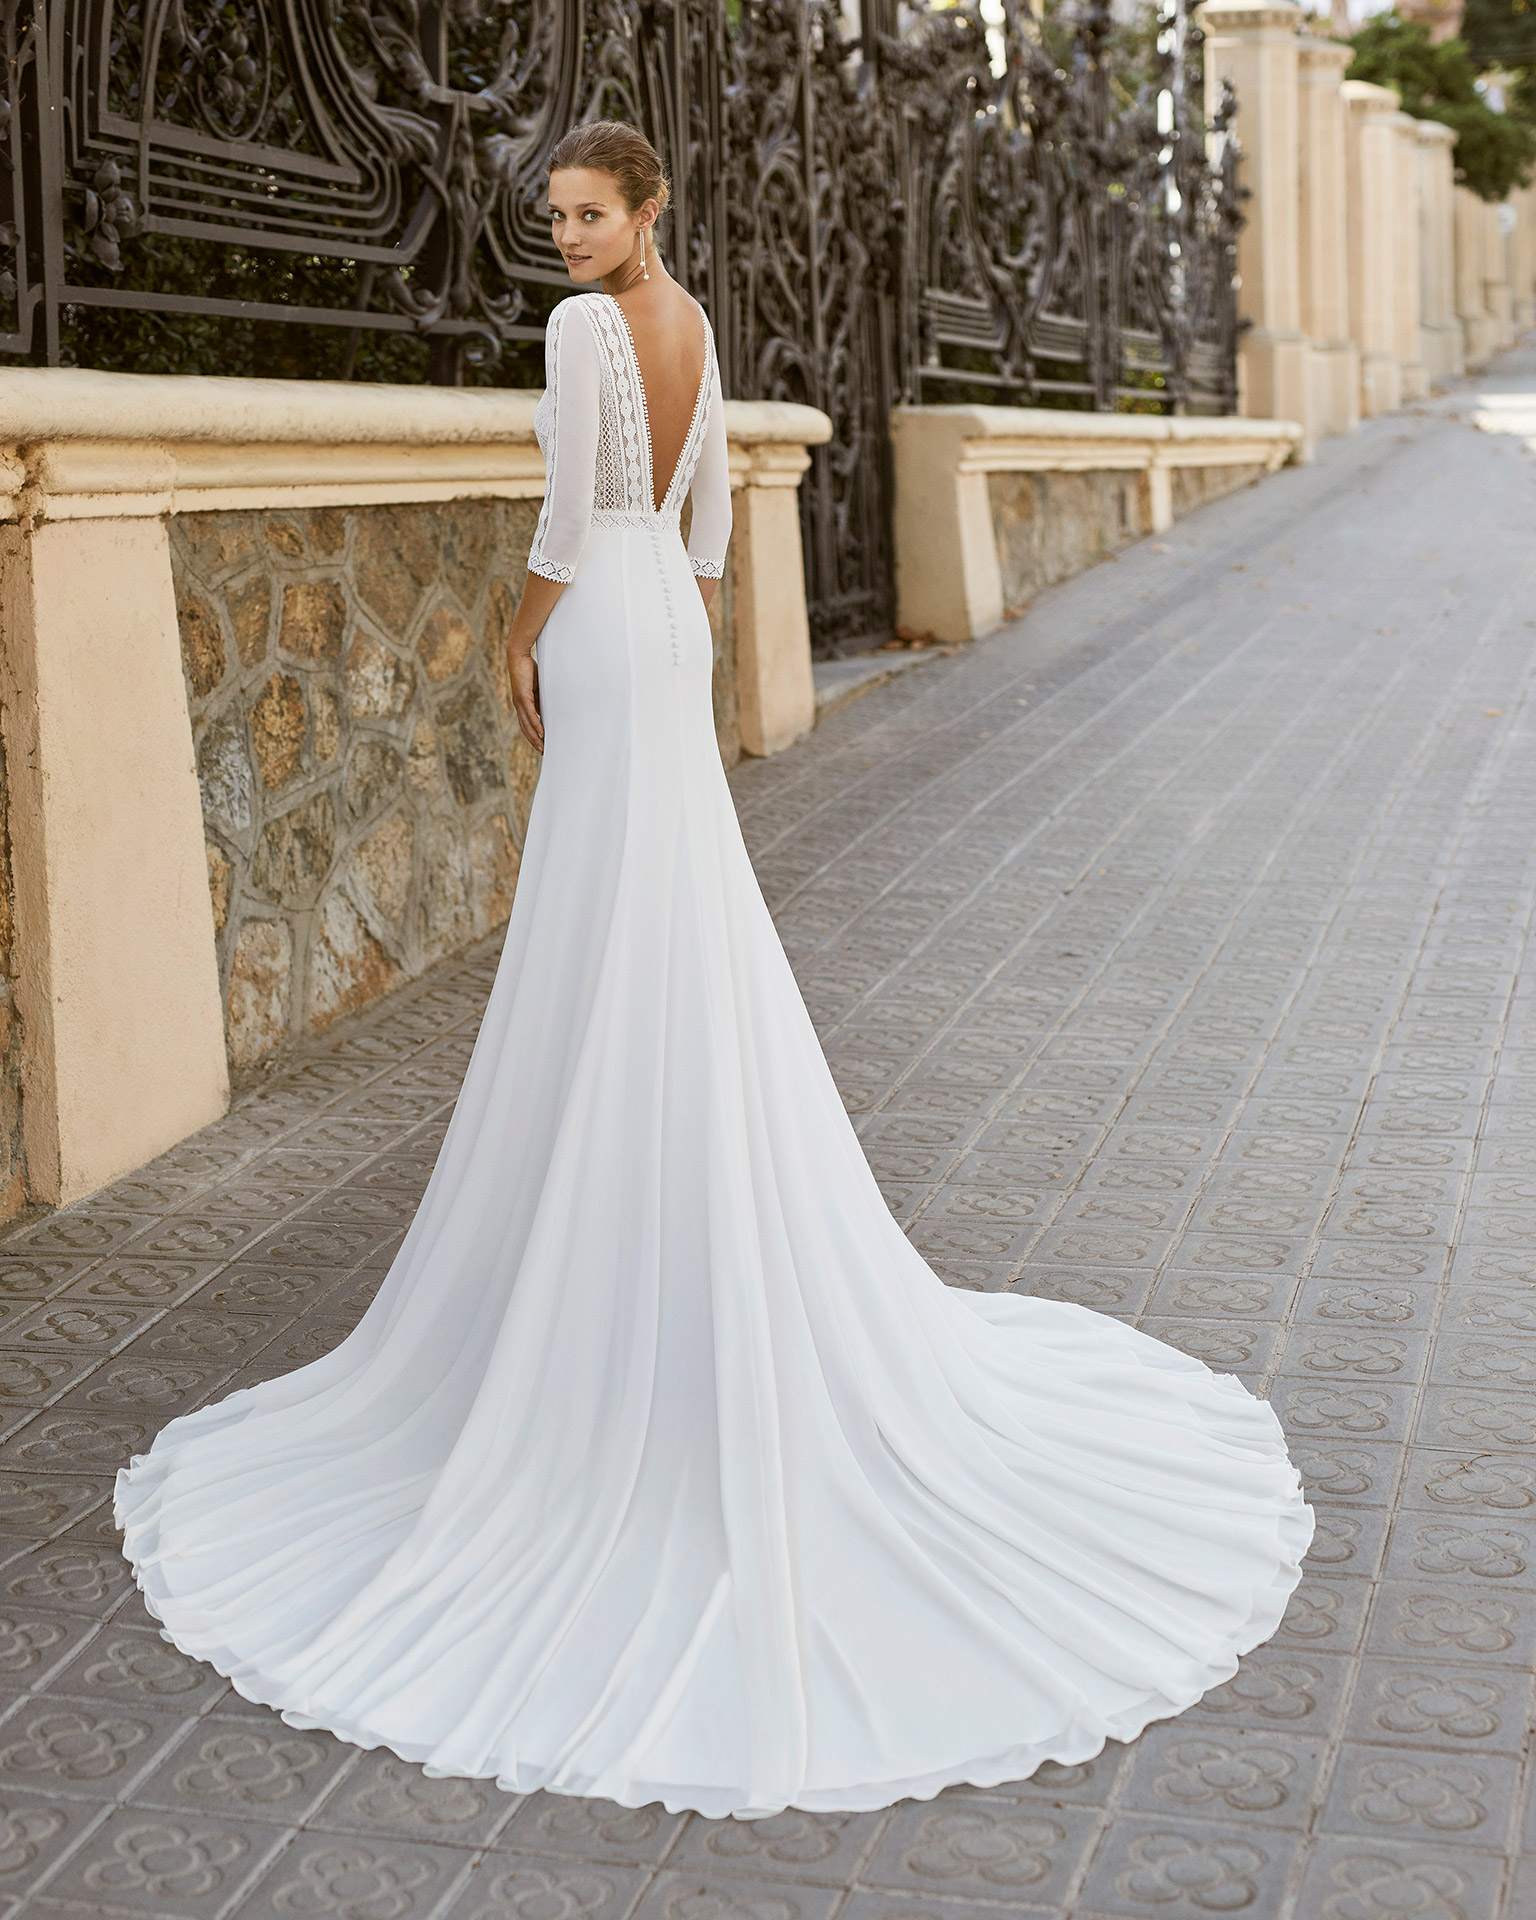 Lightweight wedding dress in georgette with beaded waist. Boat neck, low back and 3/4-length sleeves. 2022  Collection.